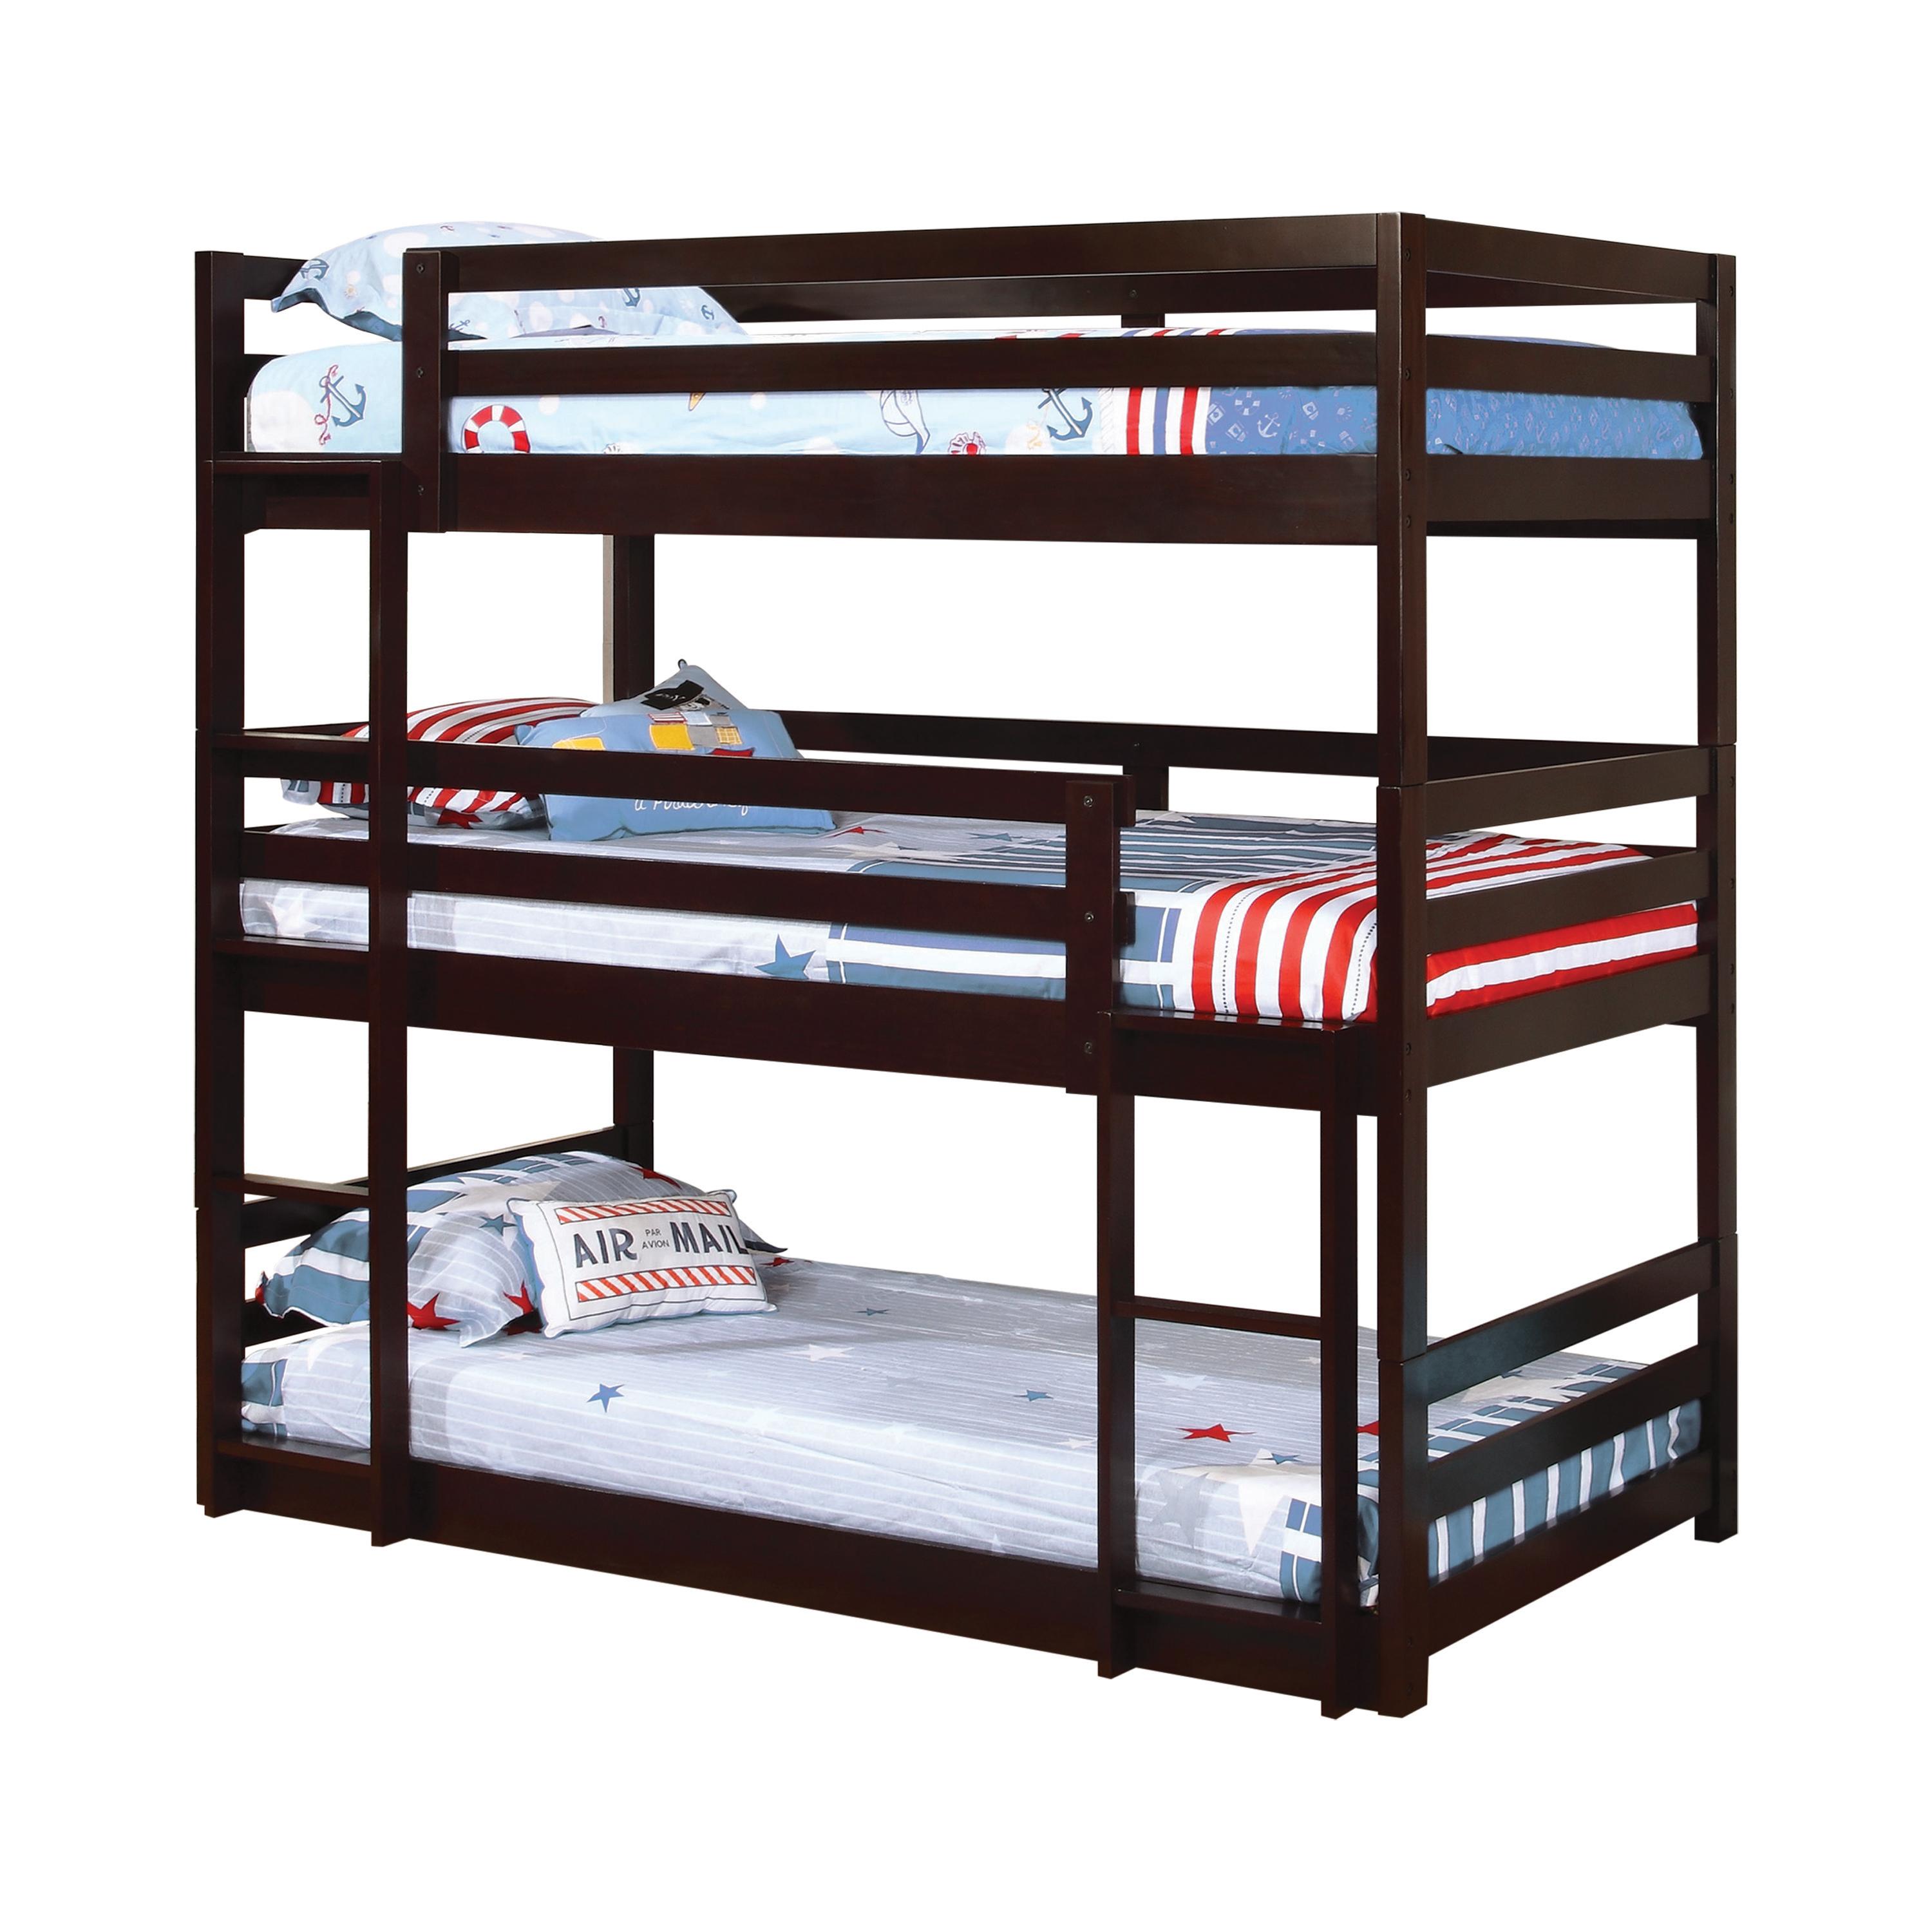 Transitional Triple Bunk Bed 400302 Sandler 400302 in Cappuccino 